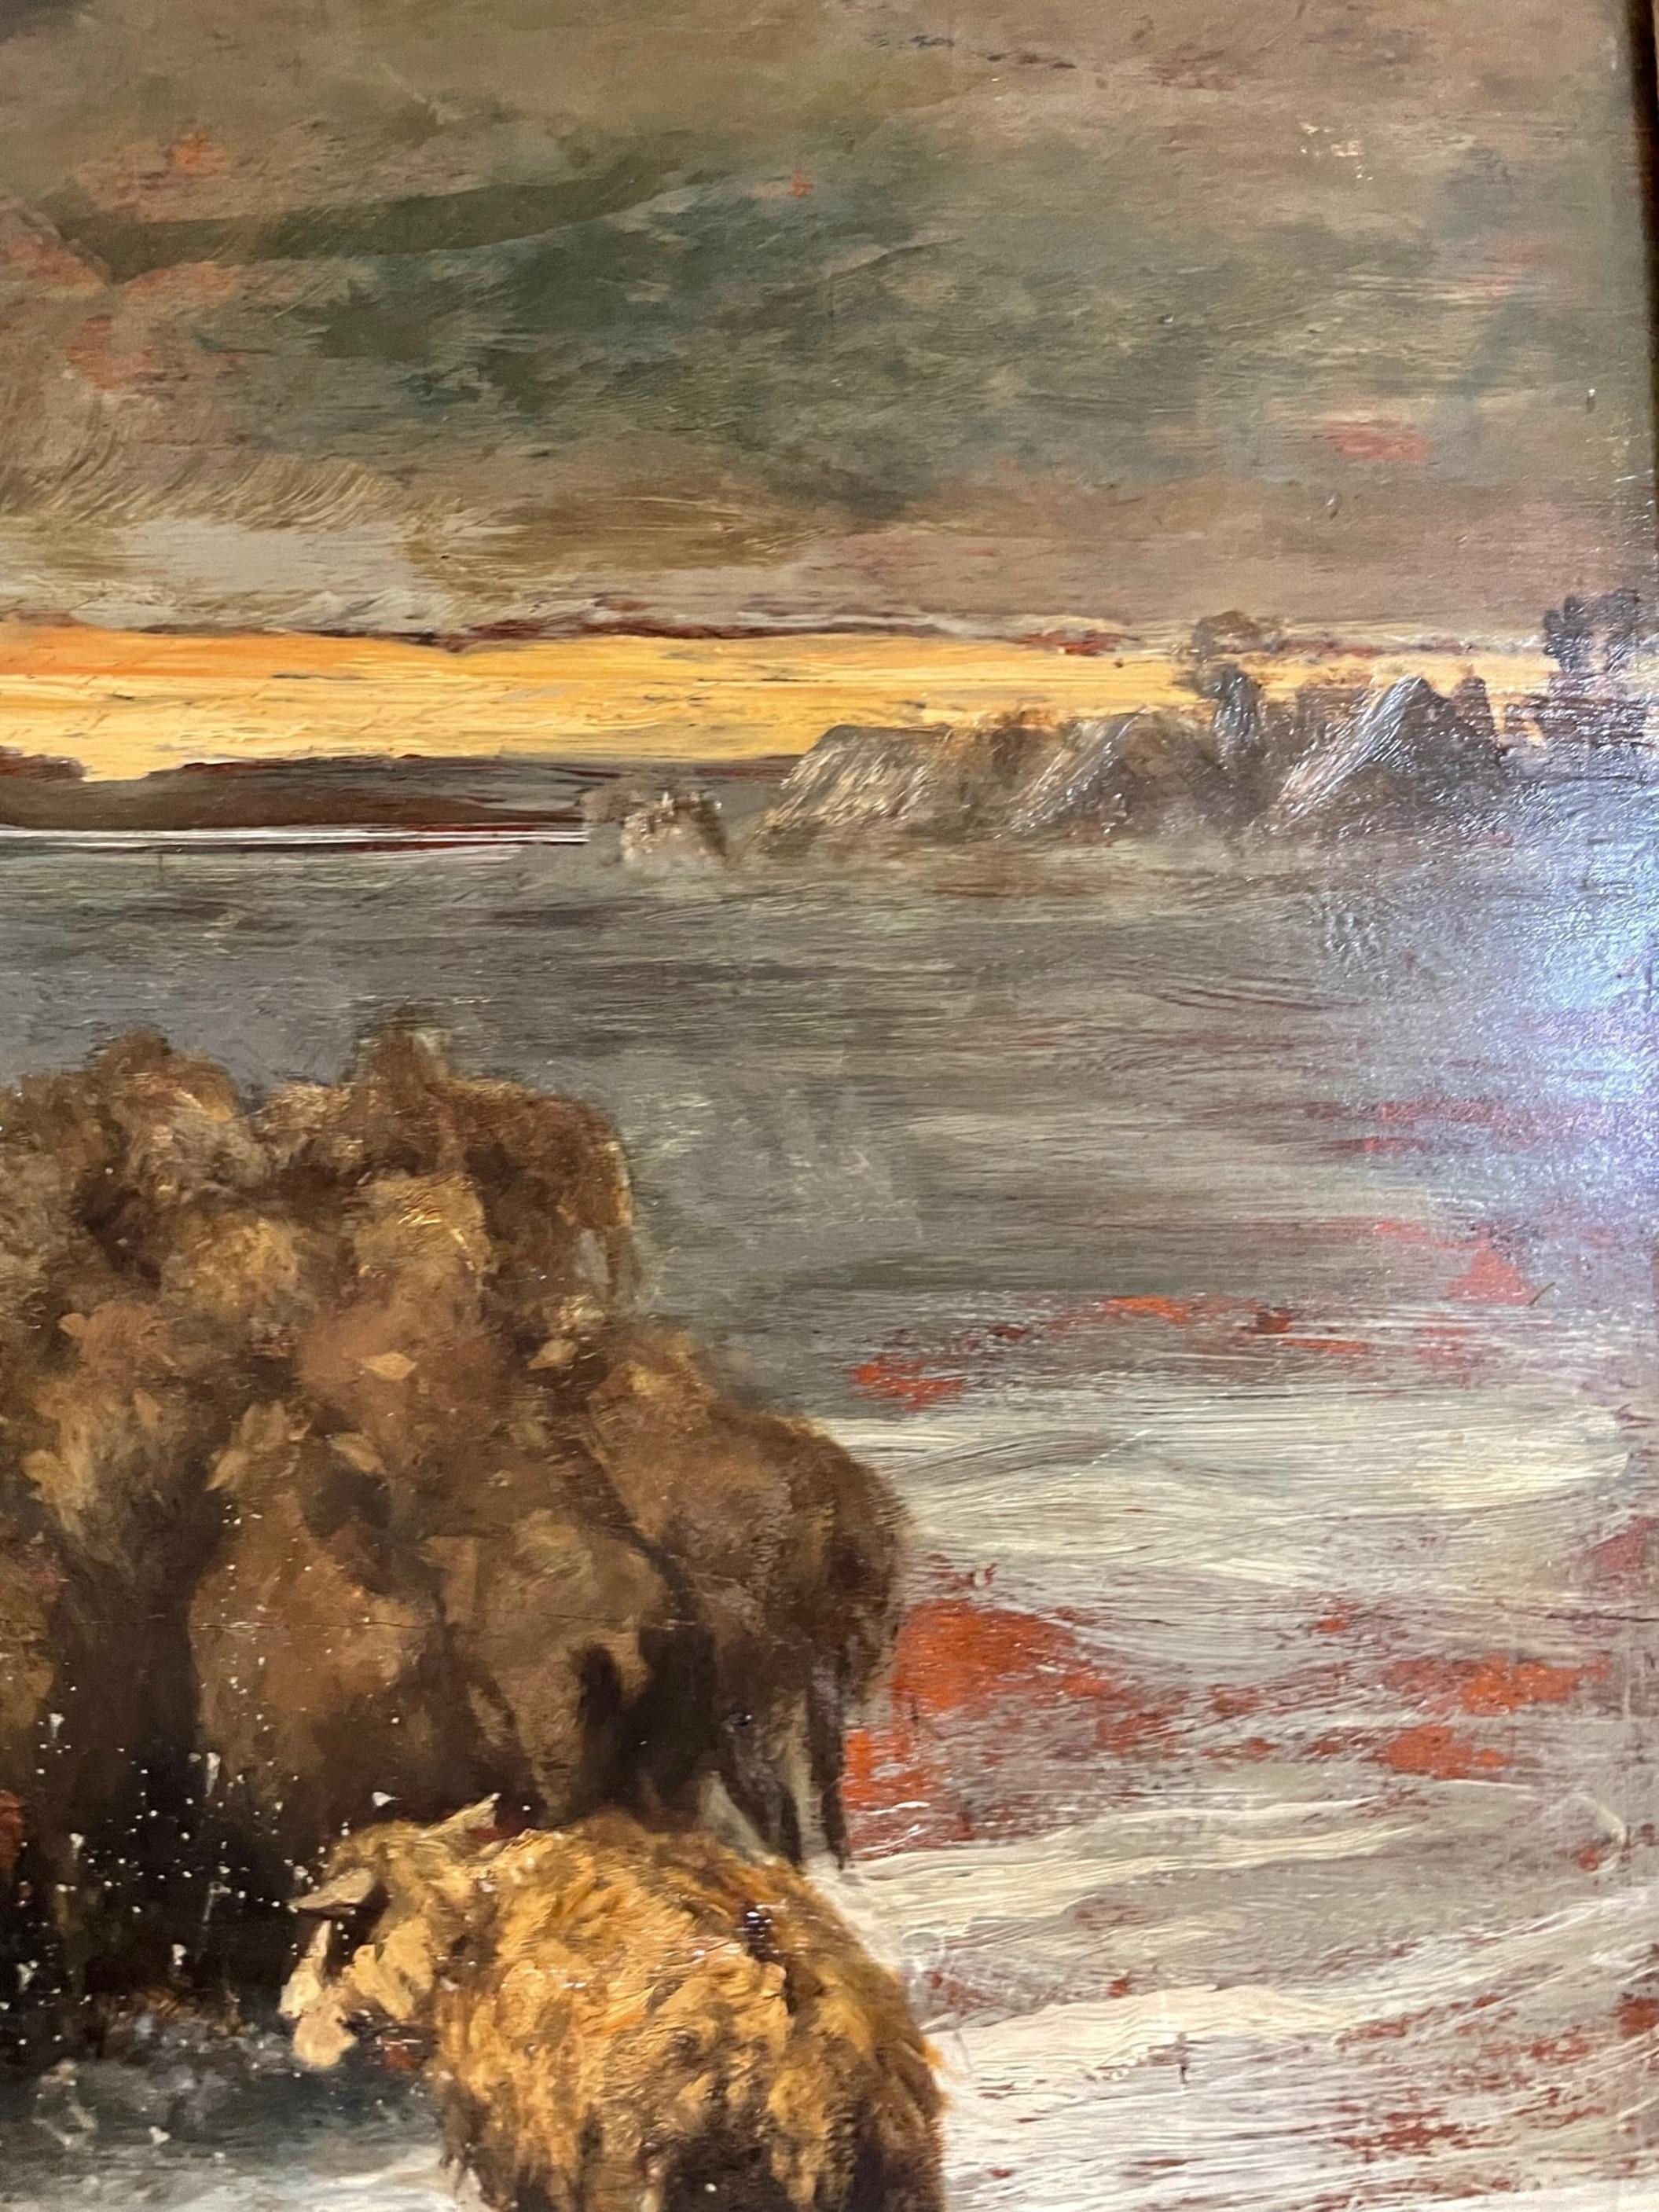 French 19th C. Barbizon Painting “Sheep in Blizzard” Signed Gustave Courbet In Good Condition For Sale In Vero Beach, FL